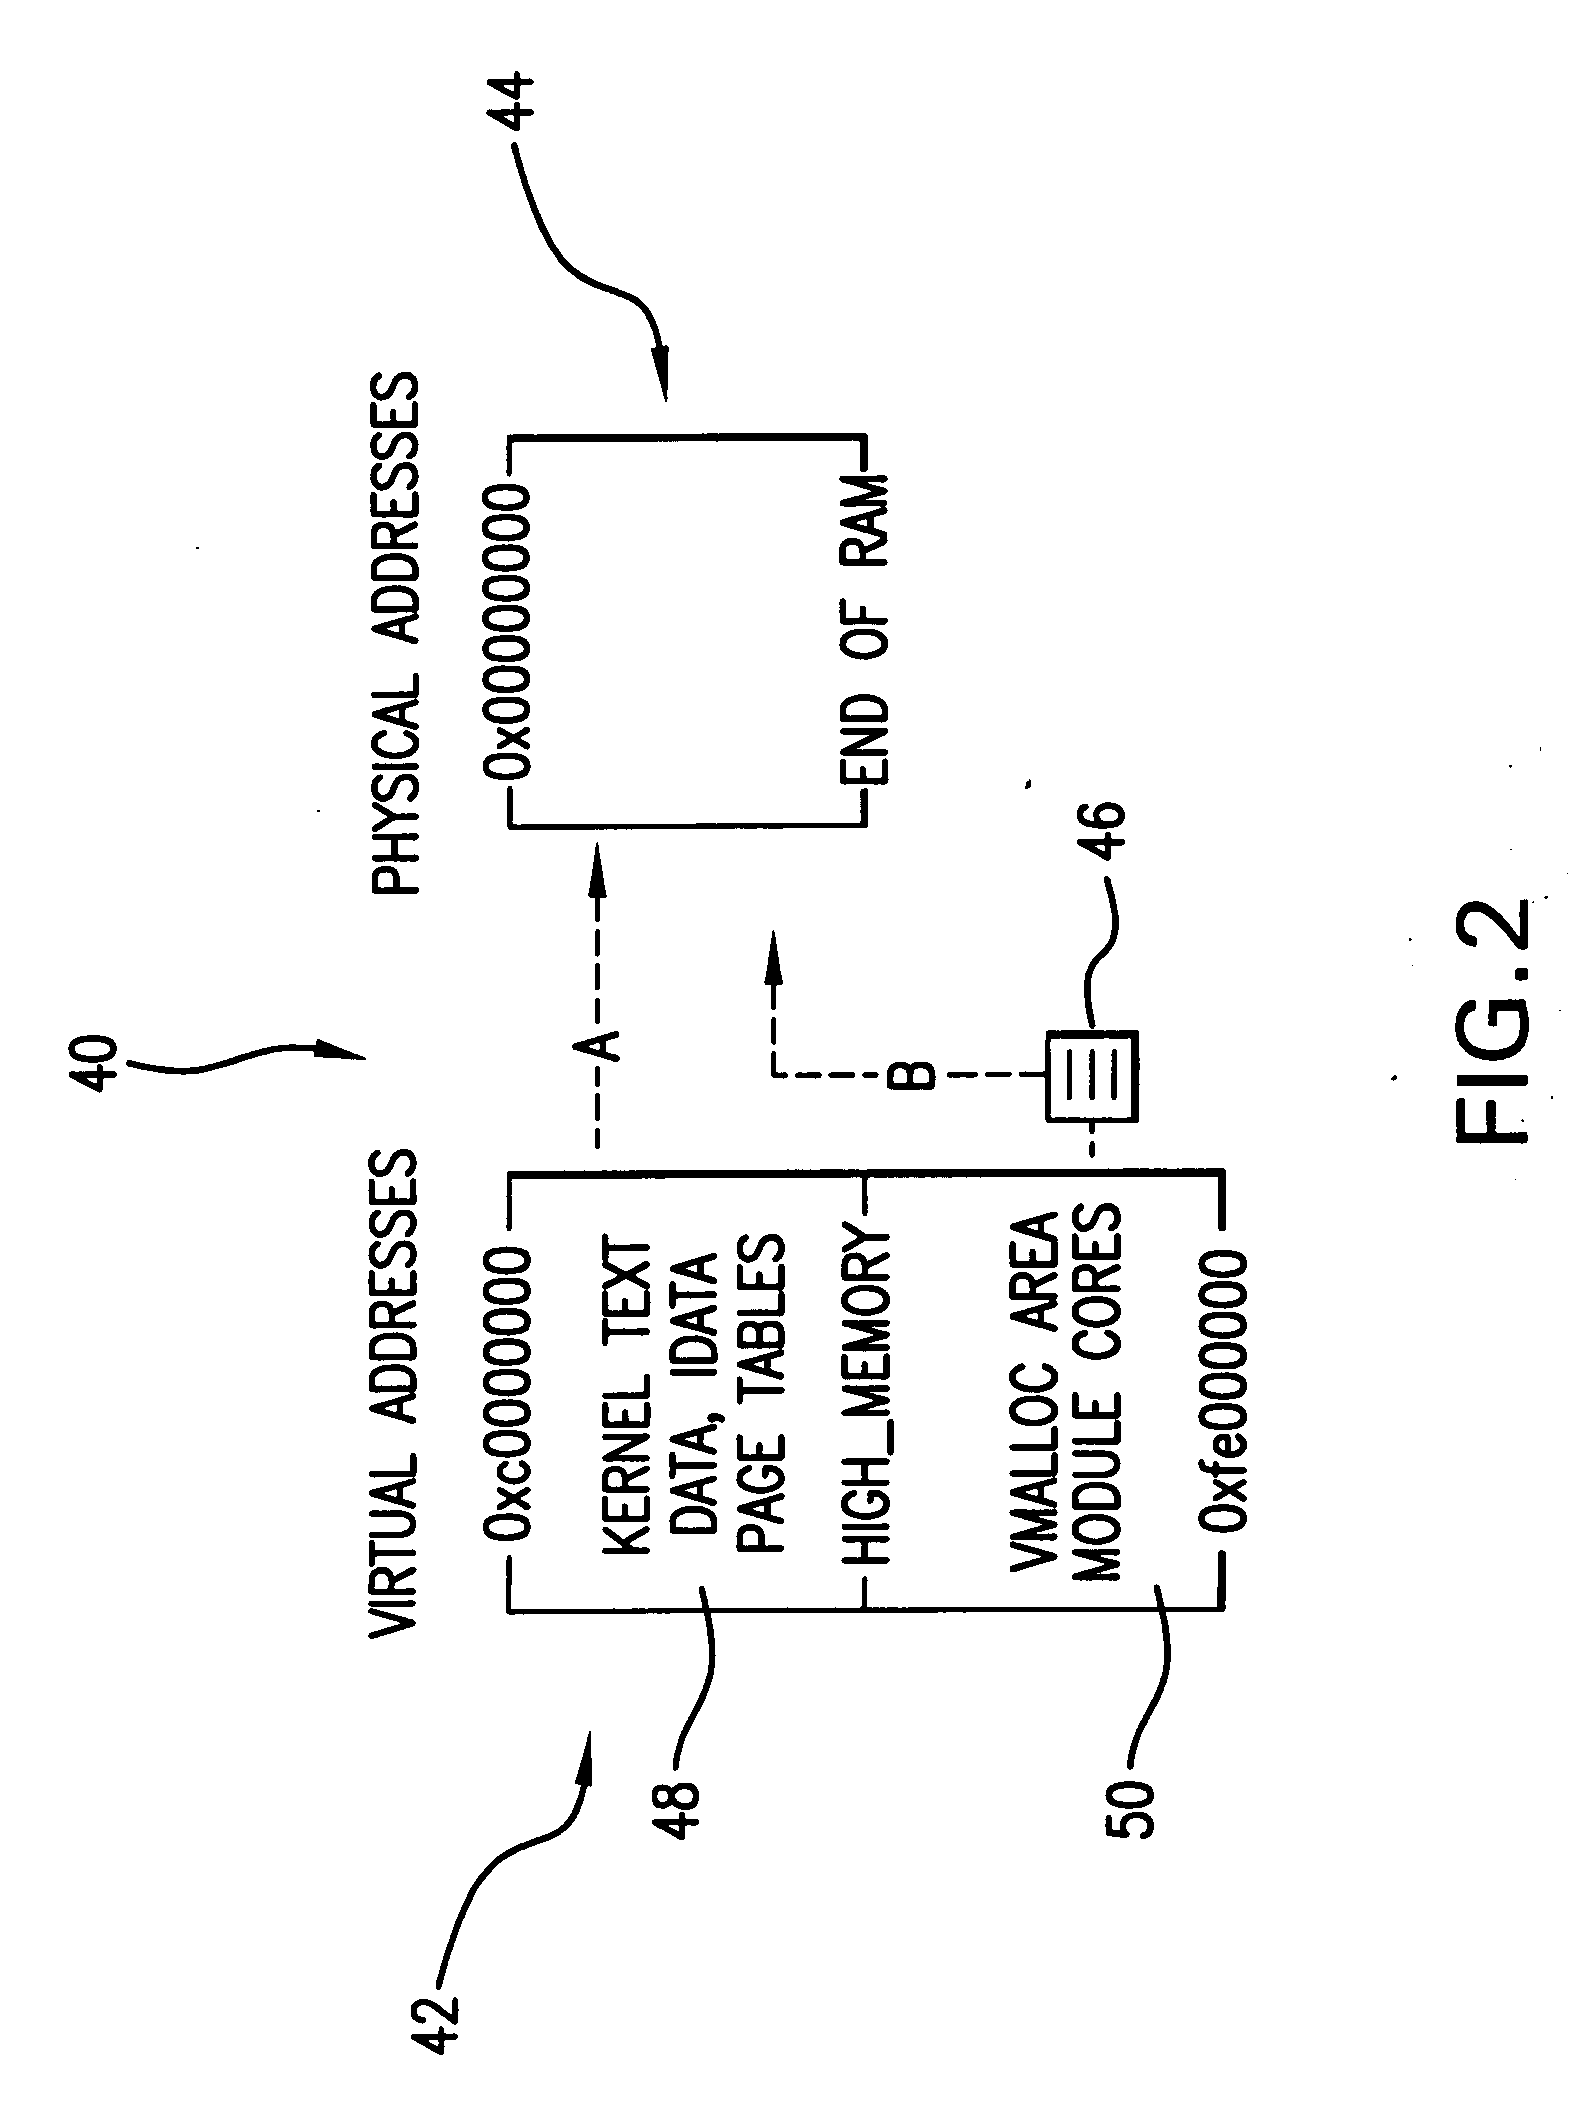 Method and system for monitoring system memory integrity